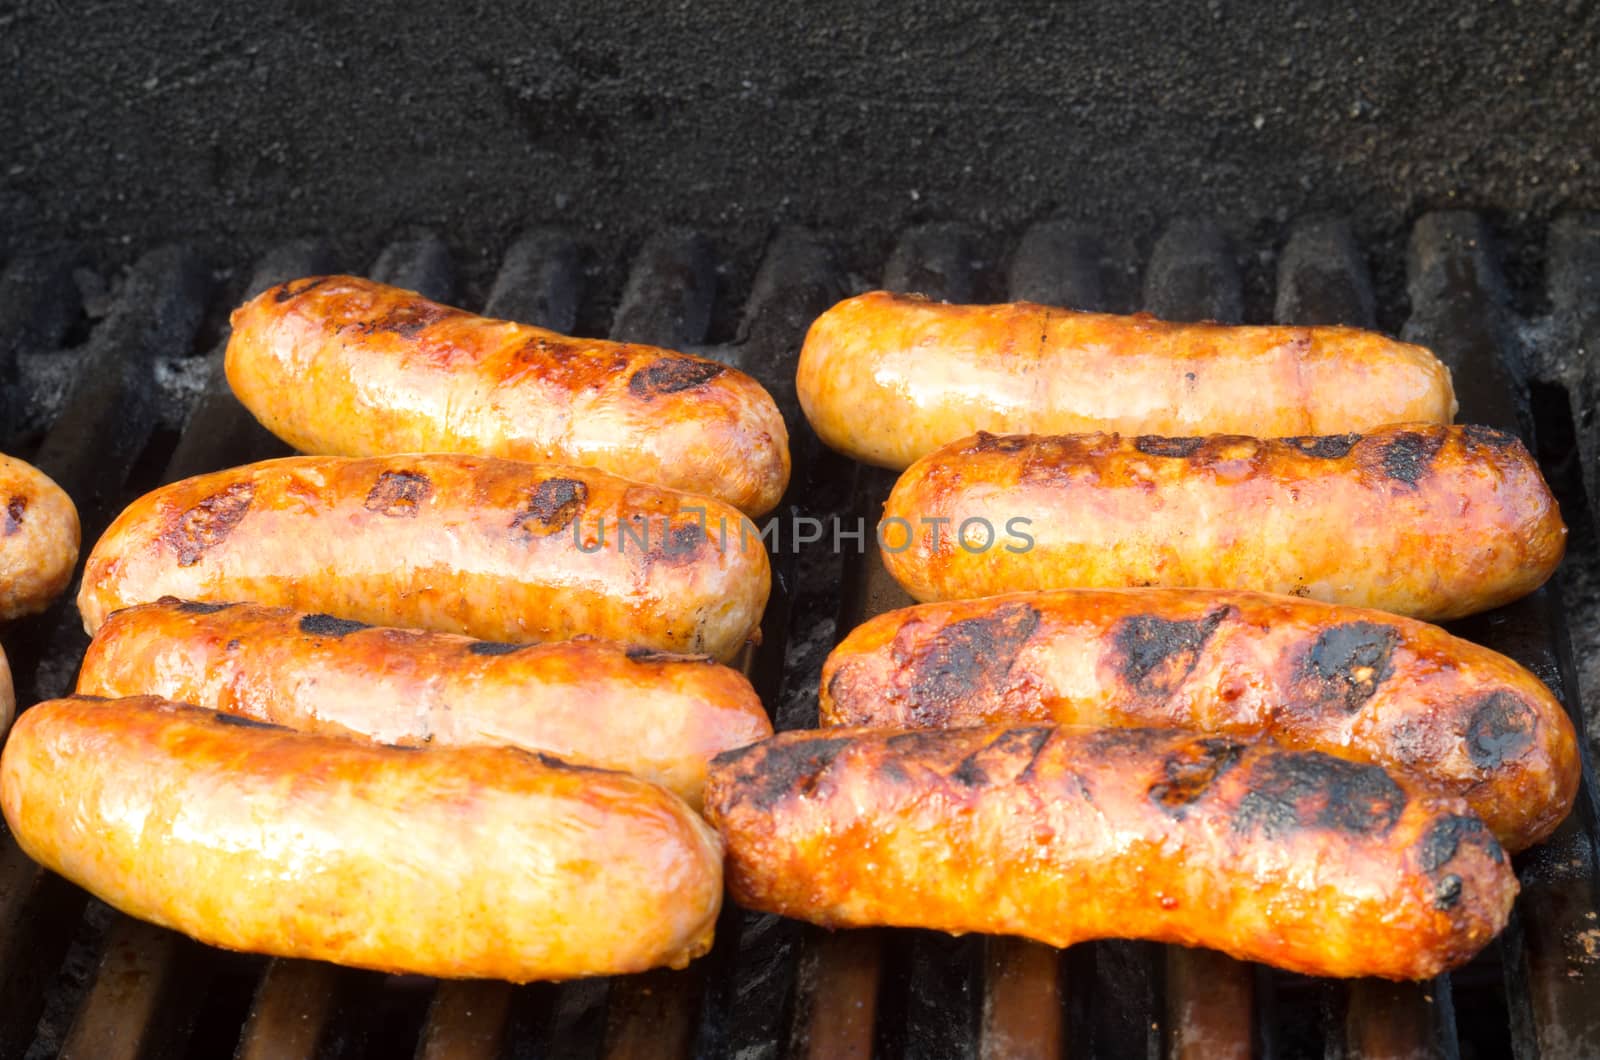 Italian sausages on grill by daoleduc